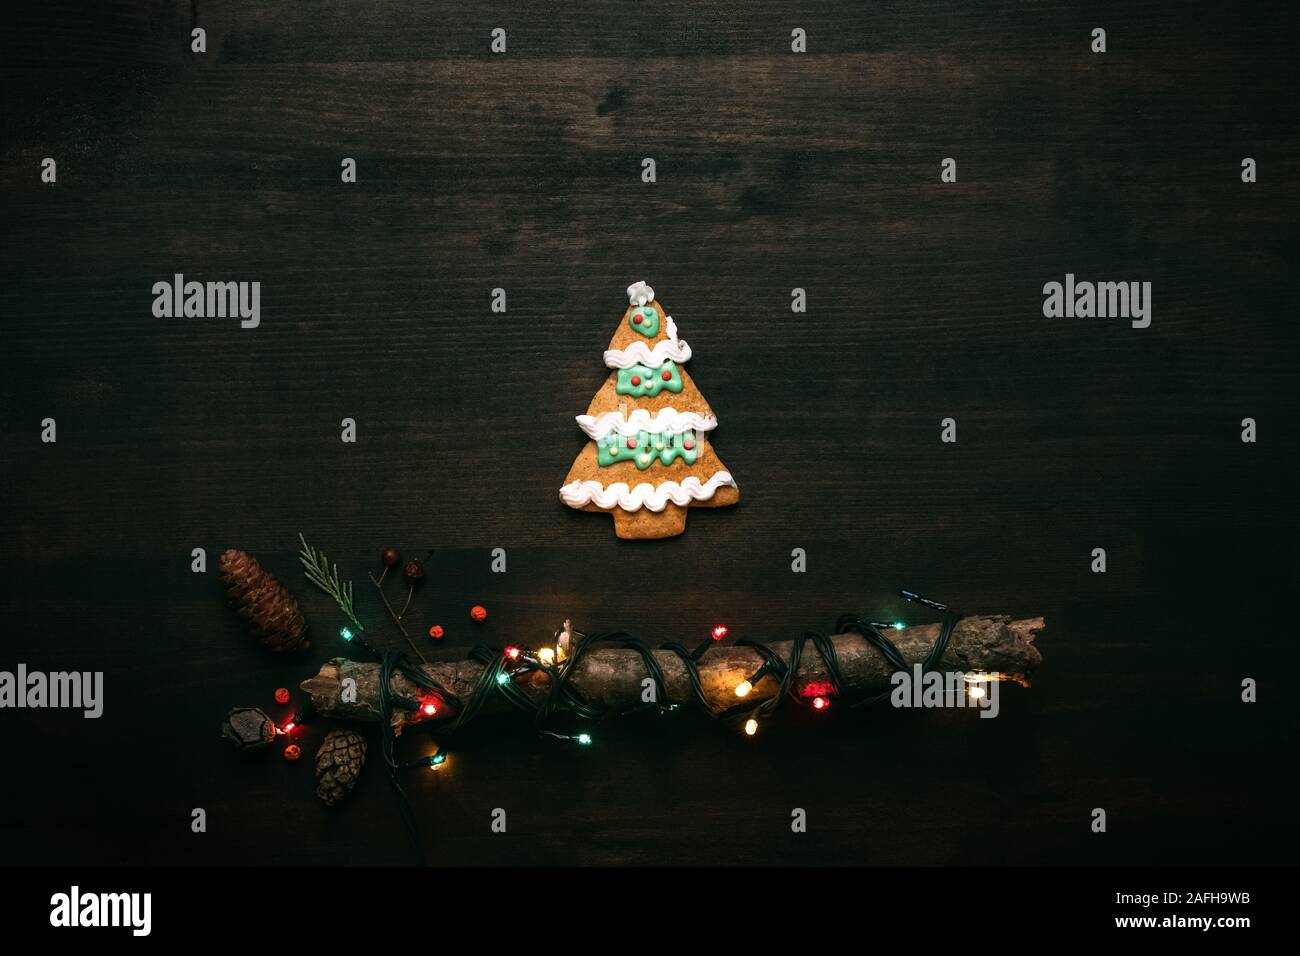 Merry Christmas flat lay top view background with gingerbread tree cookie and twinkle light on wooden board Stock Photo